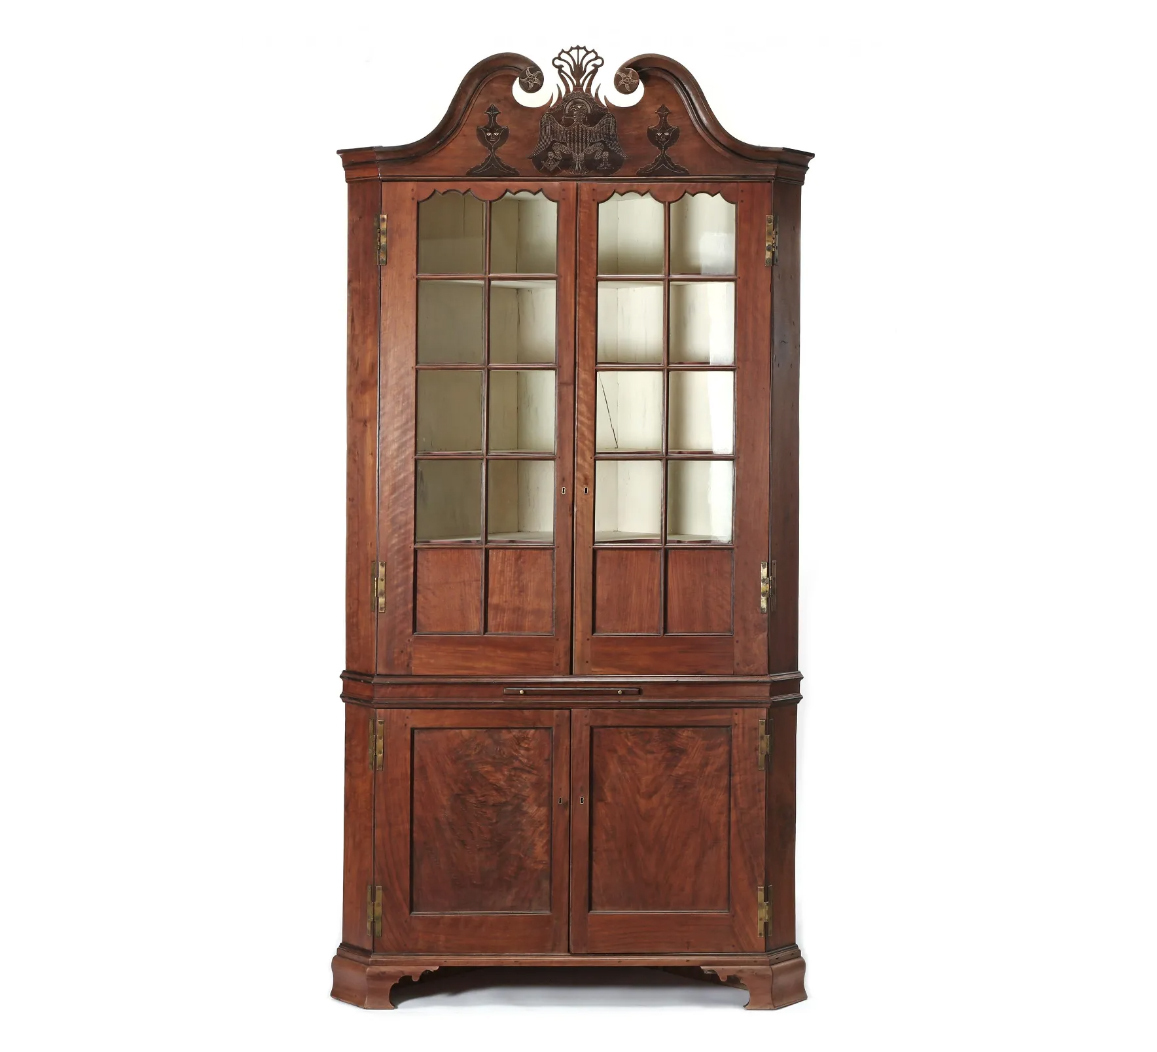 Little has a fondness for antique furniture and was especially delighted with the performance of a Powell family North Carolina Chippendale corner cupboard that achieved $225,000 plus the buyer’s premium at Leland Little Auctions in December 2021. Image courtesy of Leland Little Auctions and LiveAuctioneers.